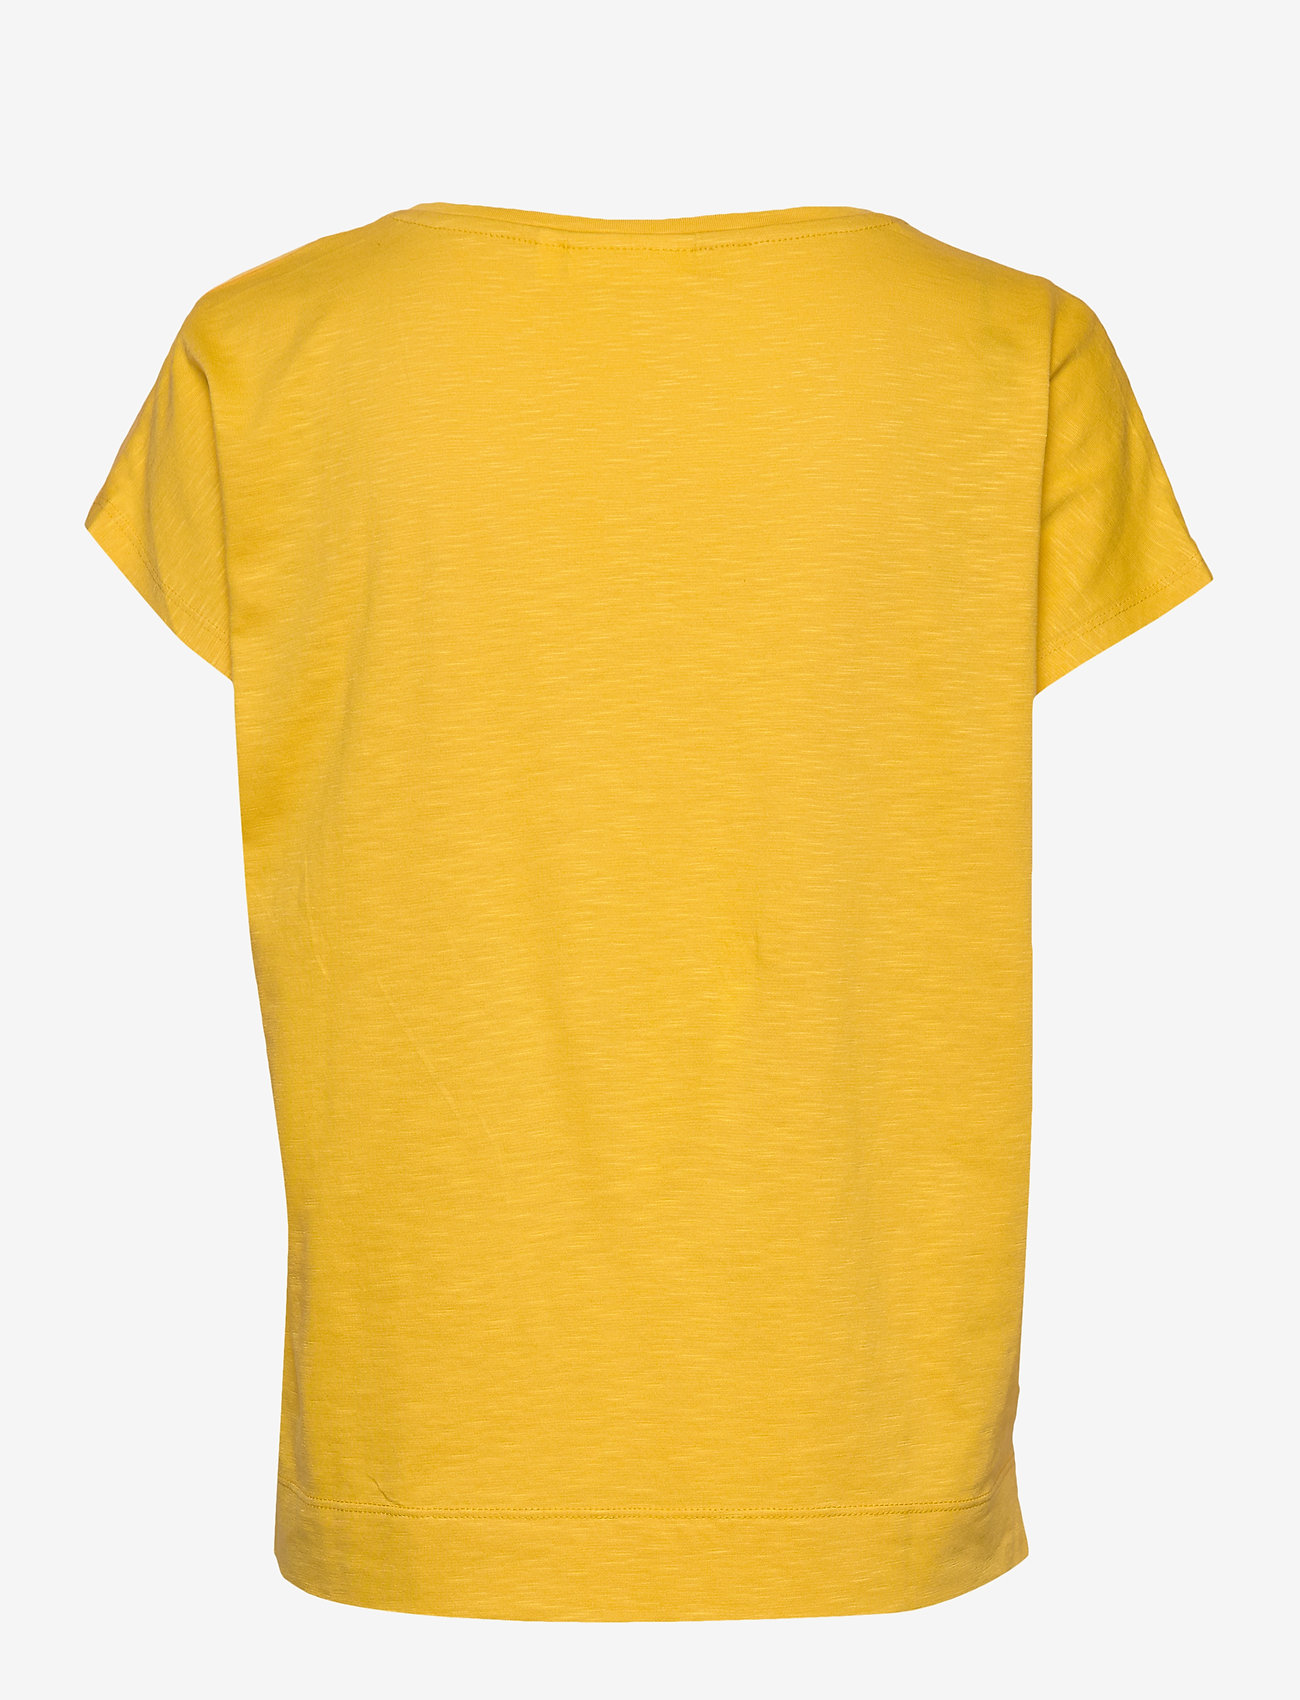 InWear - Sicily Tshirt - lowest prices - yellow small leaf - 1